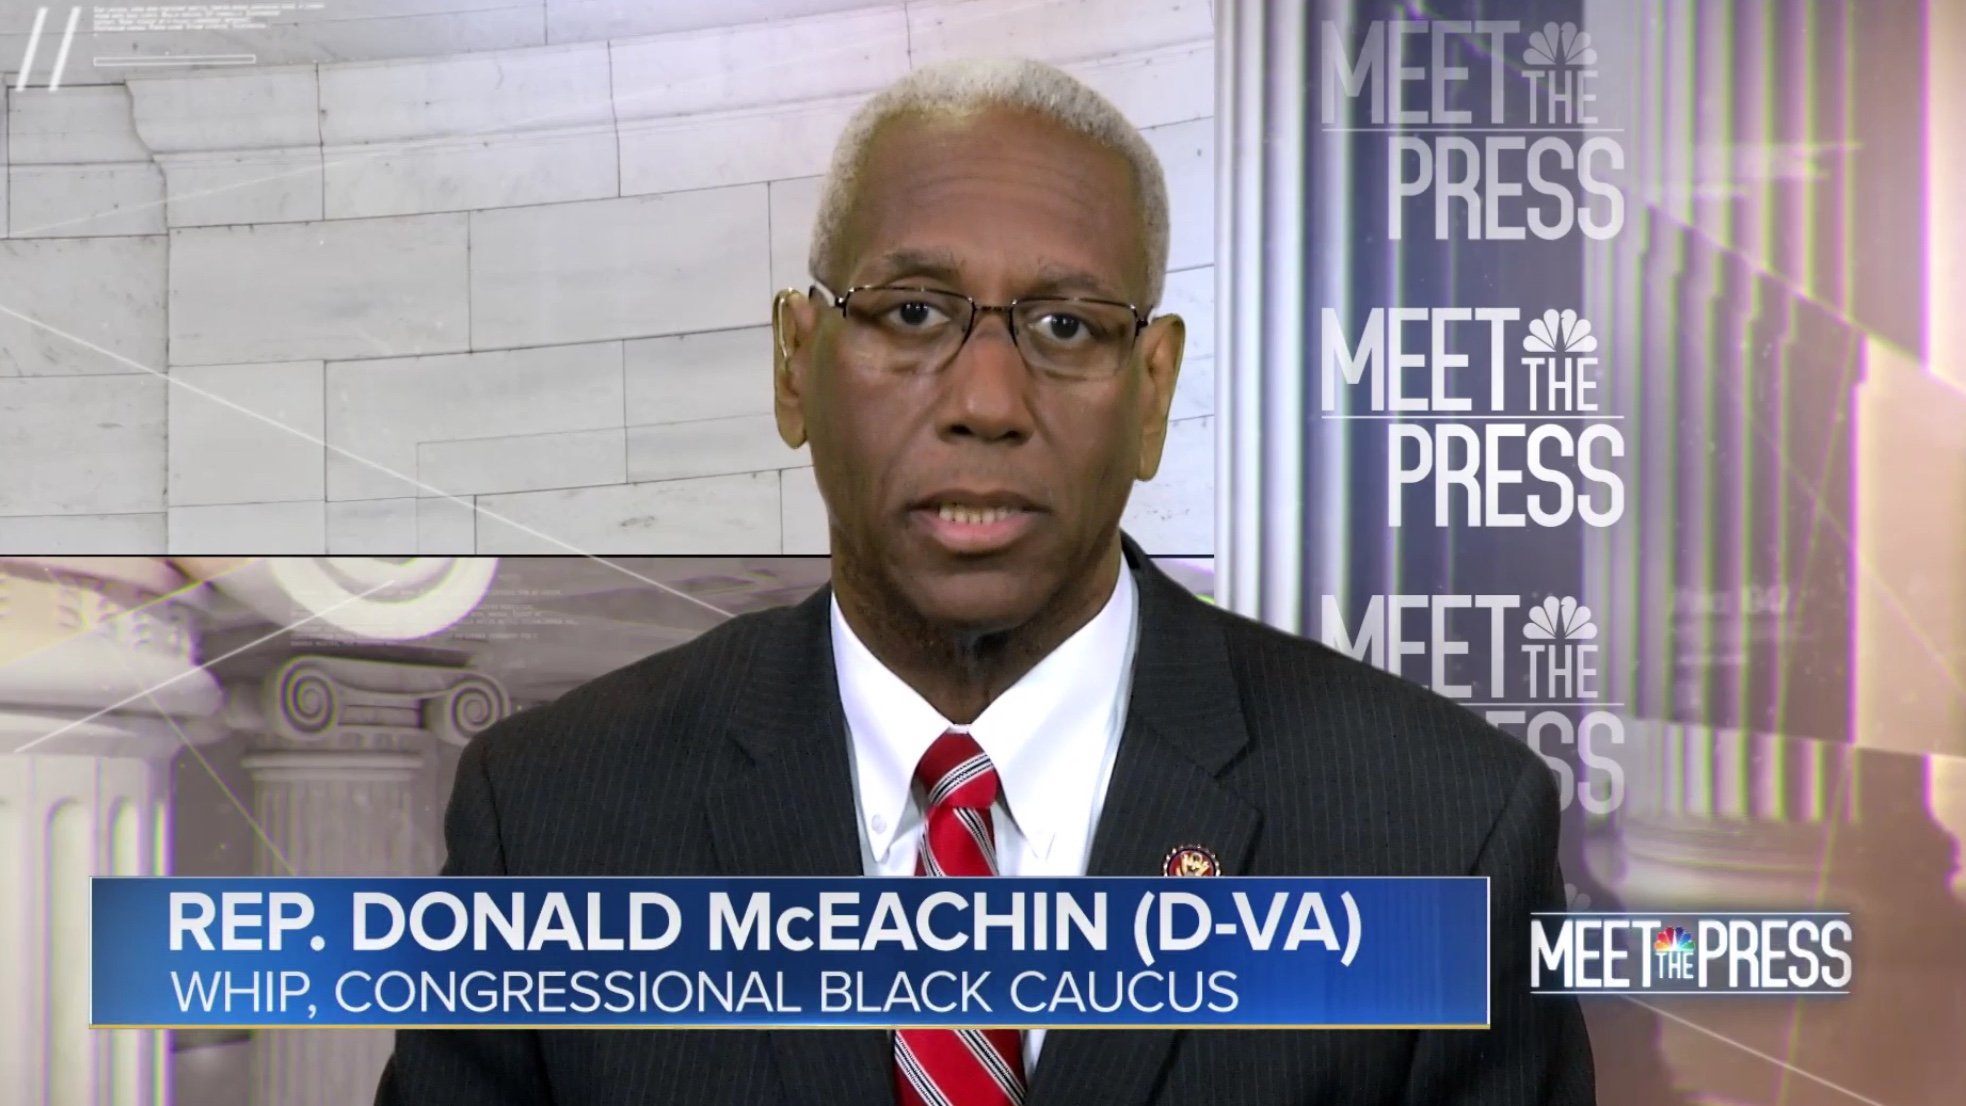 Congressional Black Caucus Whip Donald McEachin discusses the fate of Virginia Gov. Ralph Northam on “Meet the Press,” Feb. 3, 2019.